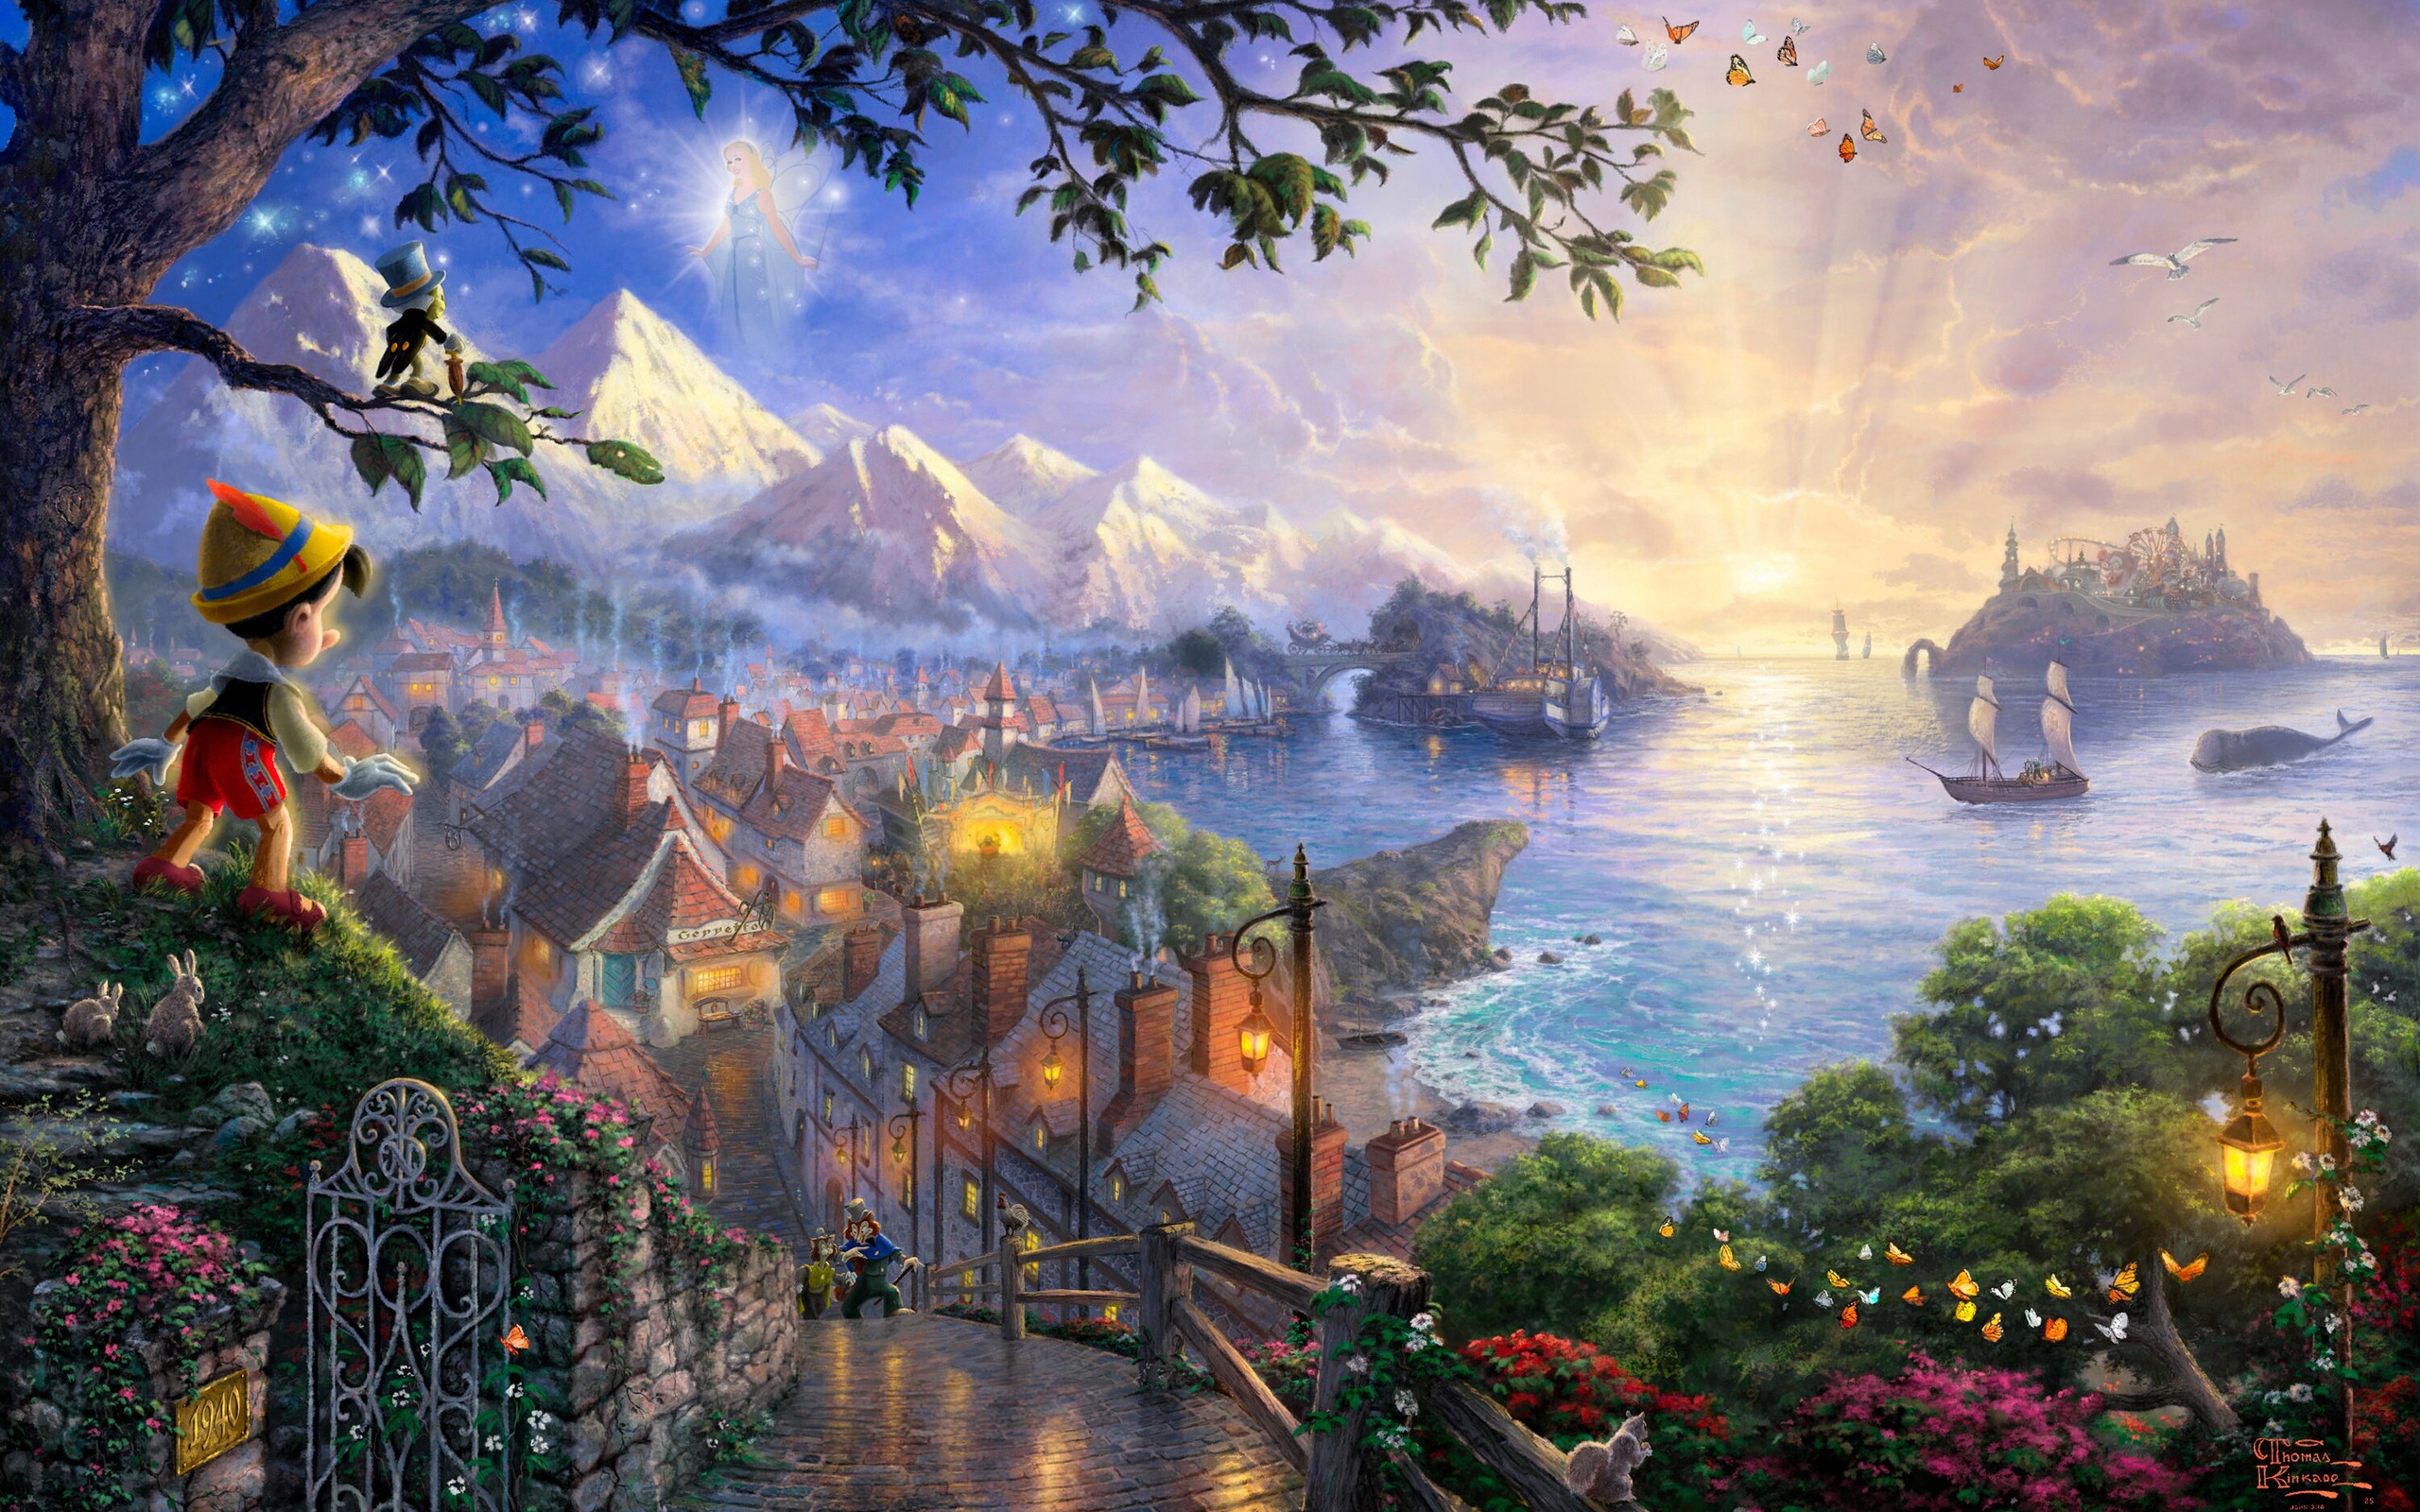 sunset, Landscapes, Disney, Company, Movies, Ships, Fantasy, Art, Pinocchio, Villages, Thomas, Kinkade, Fairy, Tales Wallpaper HD / Desktop and Mobile Background